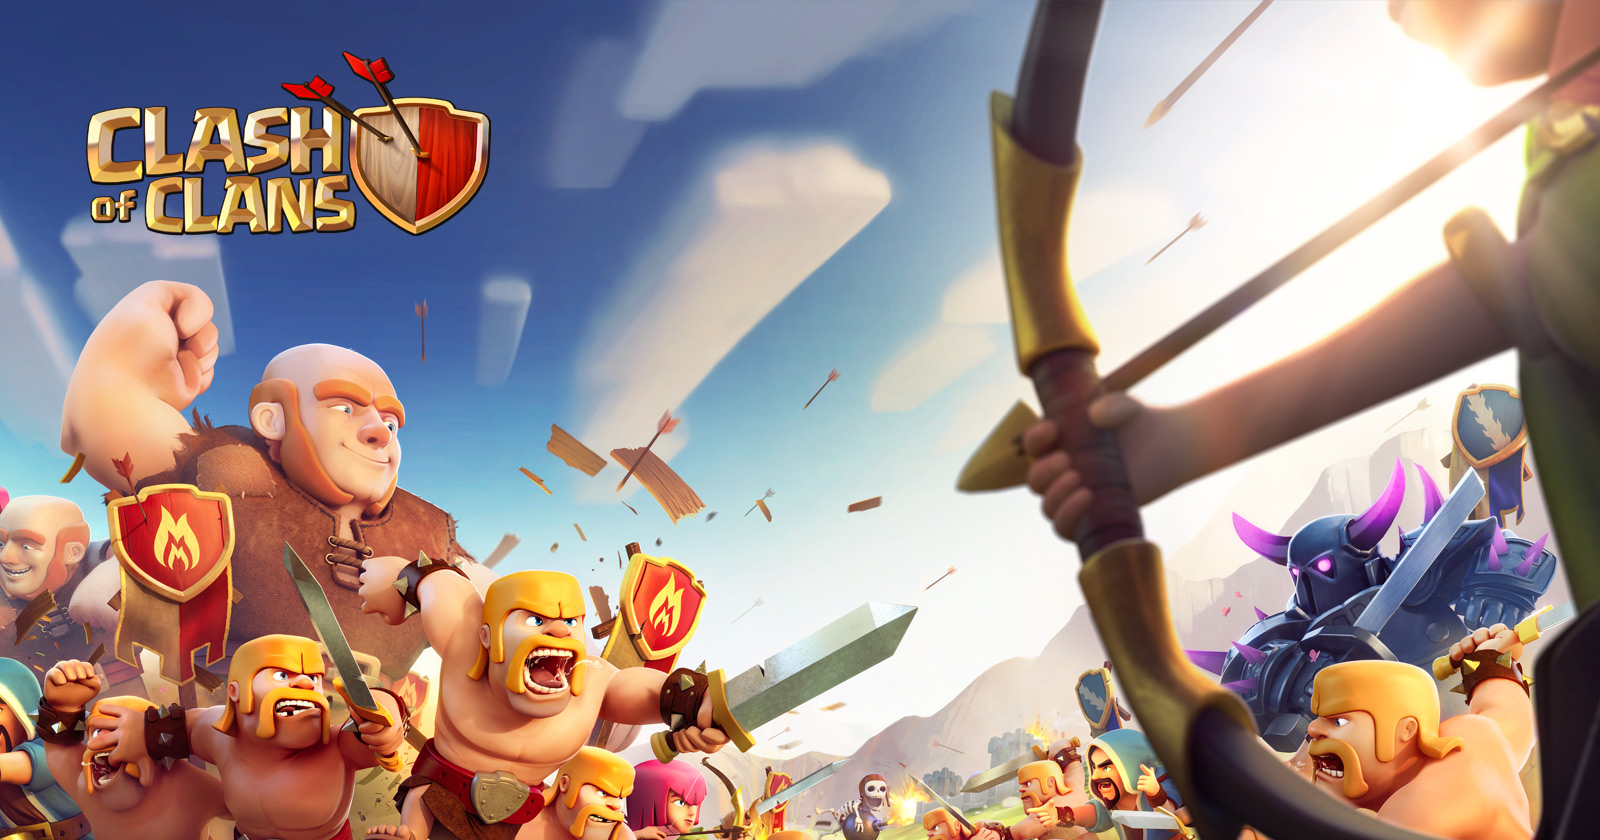 Clash of Clans - Discover How to Get Free Gems by Completing Tasks